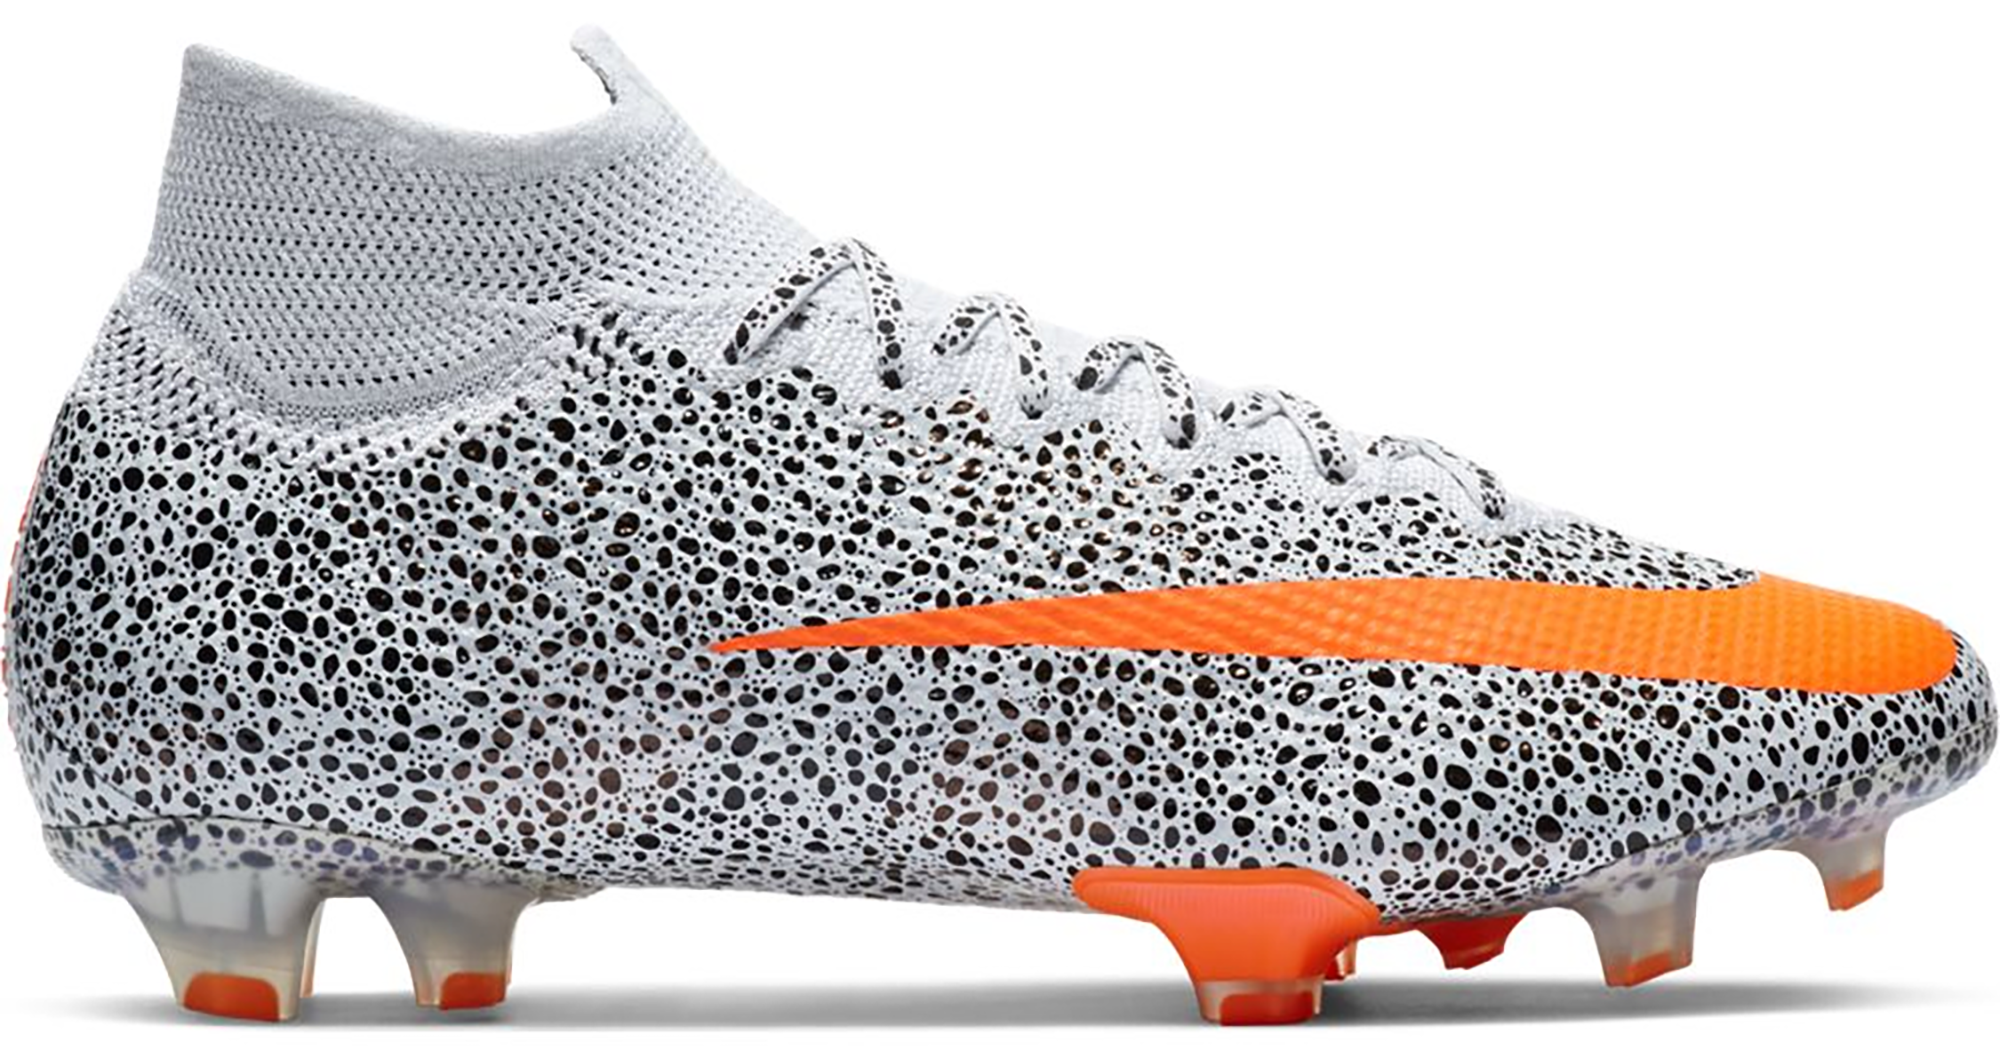 cr7 latest boots